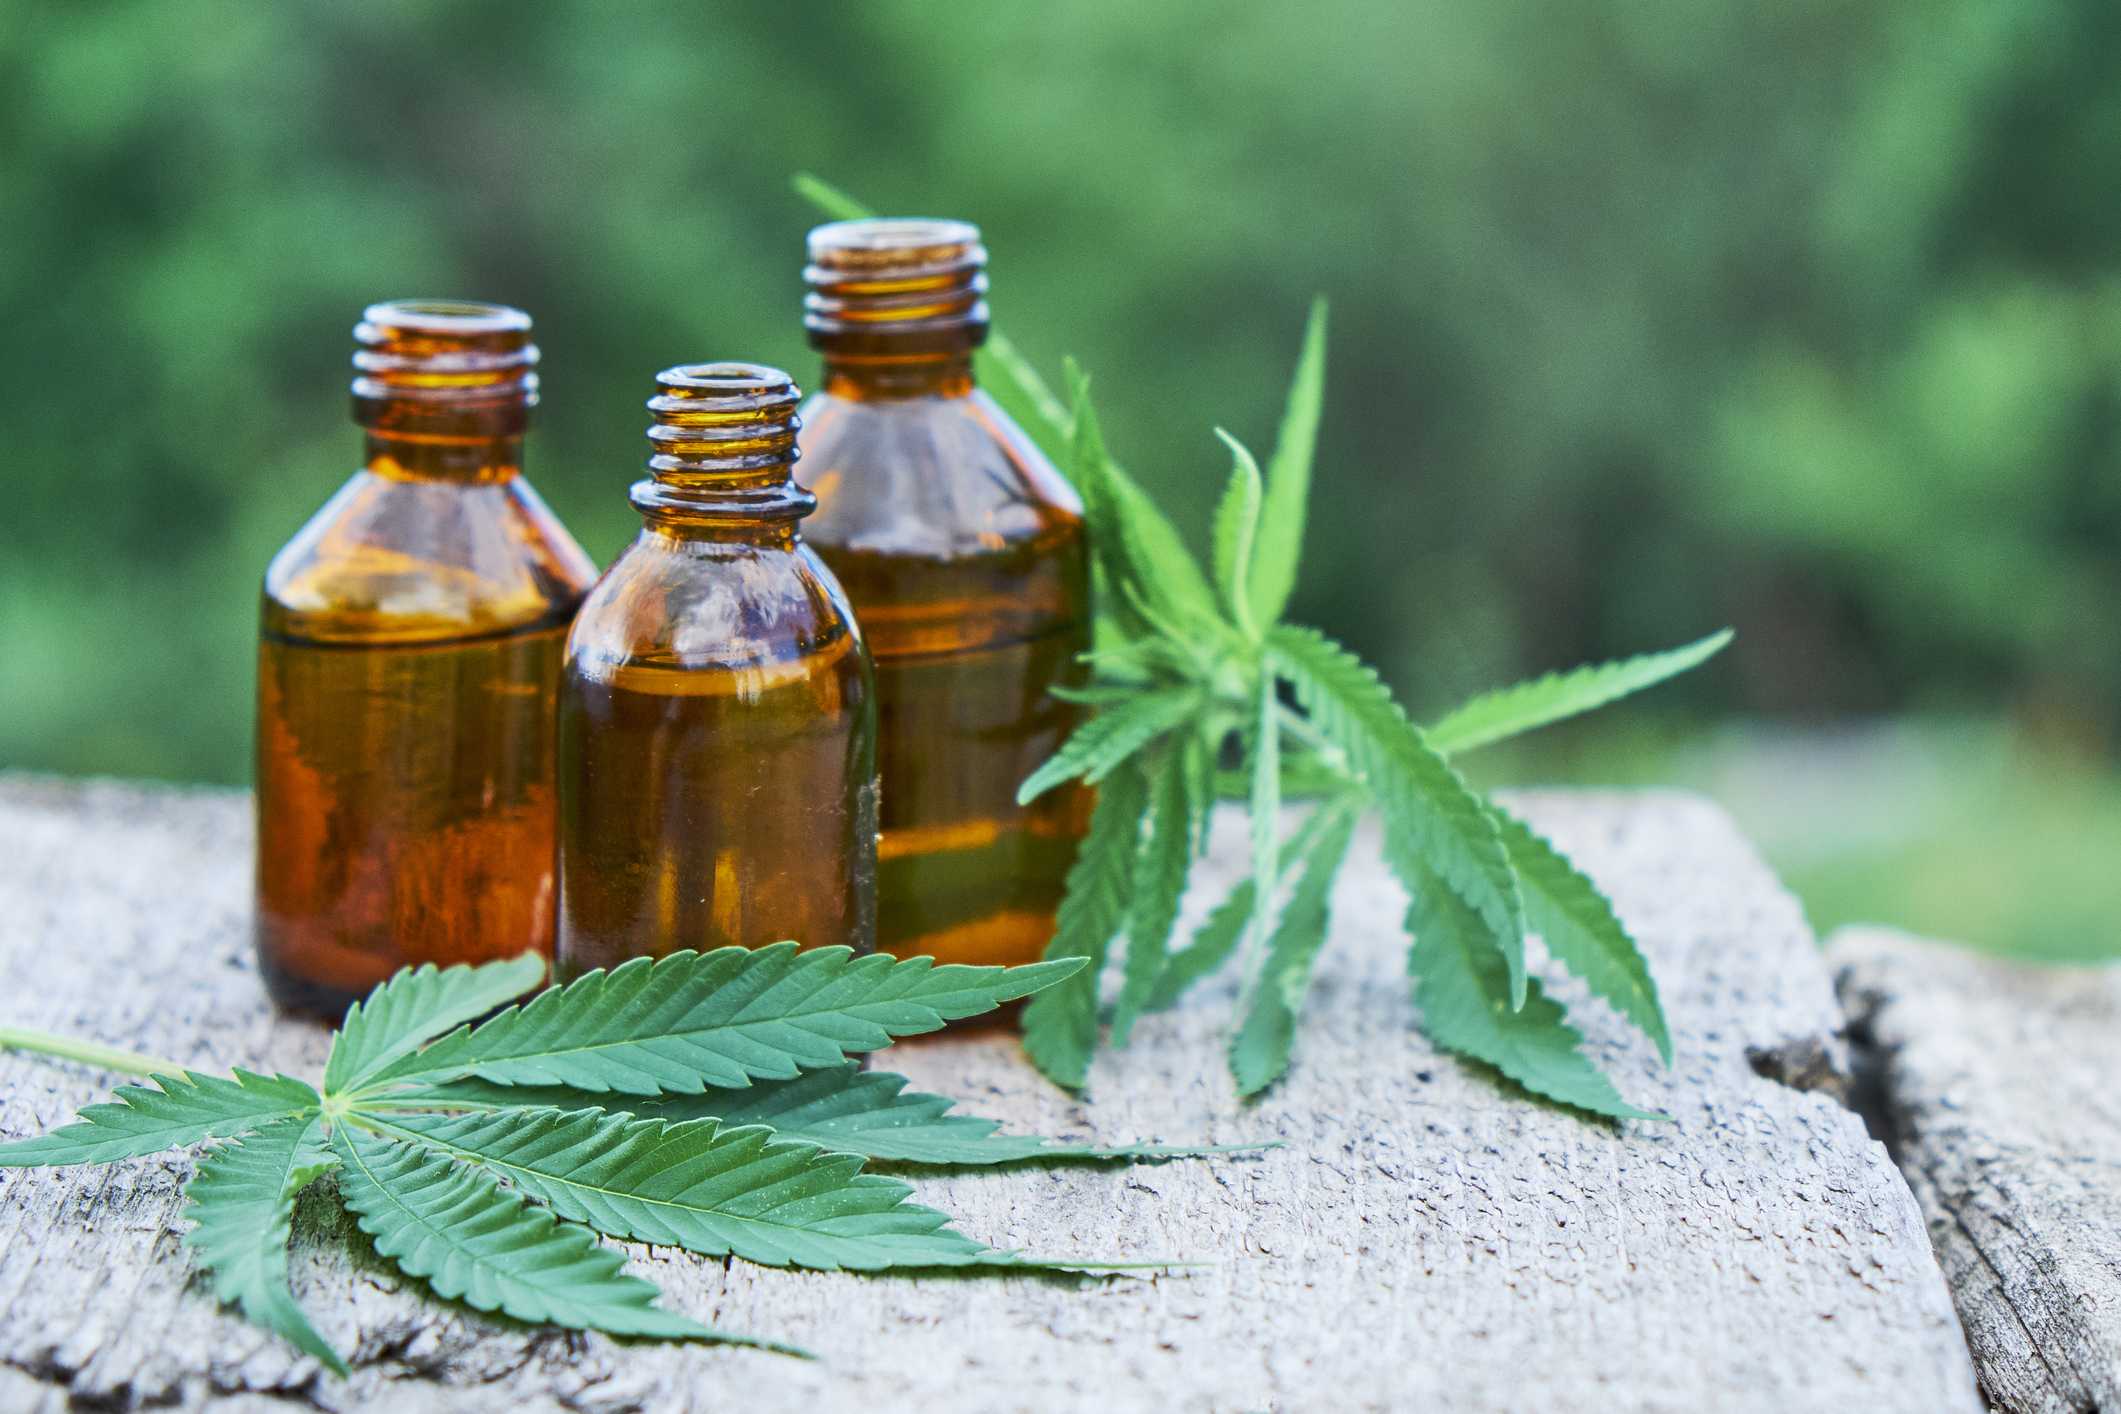 How to tell the difference between CBD pills and CBD oil